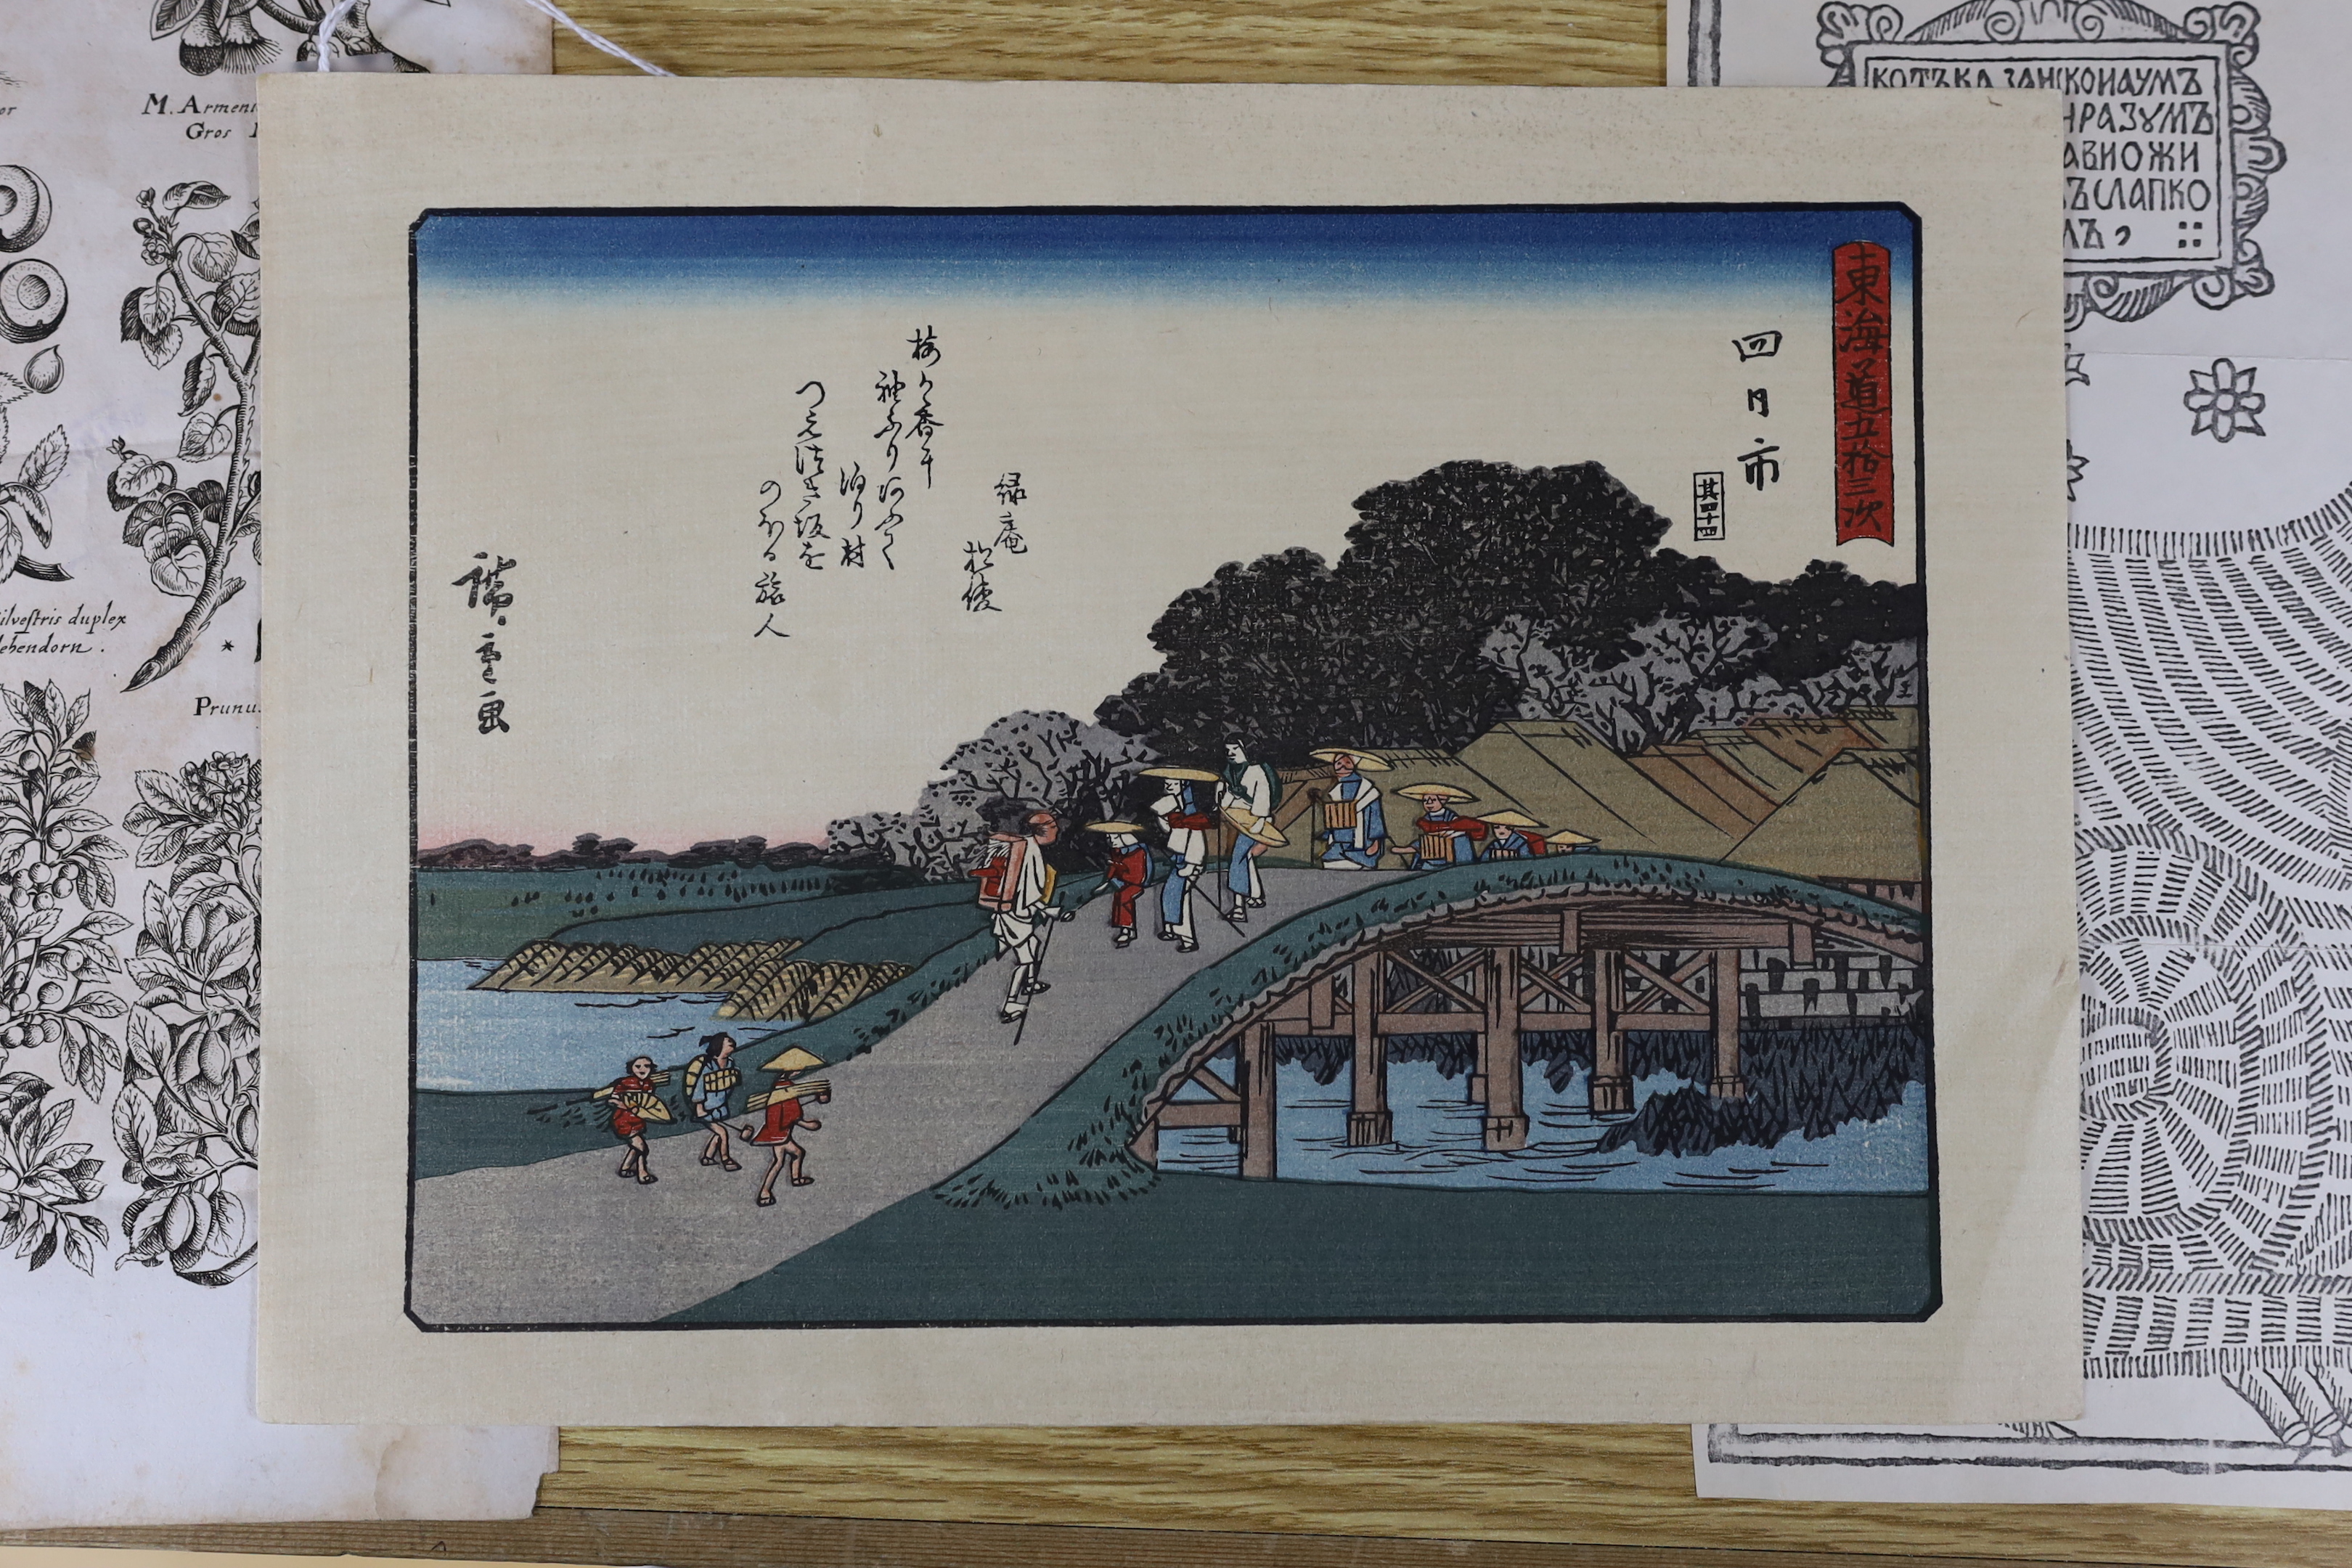 After Utagawa Hiroshige (Japanese, 1797-1858), woodblock print, Yokkaichi, with an antique botanical engraving and a Russian print, 'The Cat from Kazan', largest 34 x 19cm, unframed